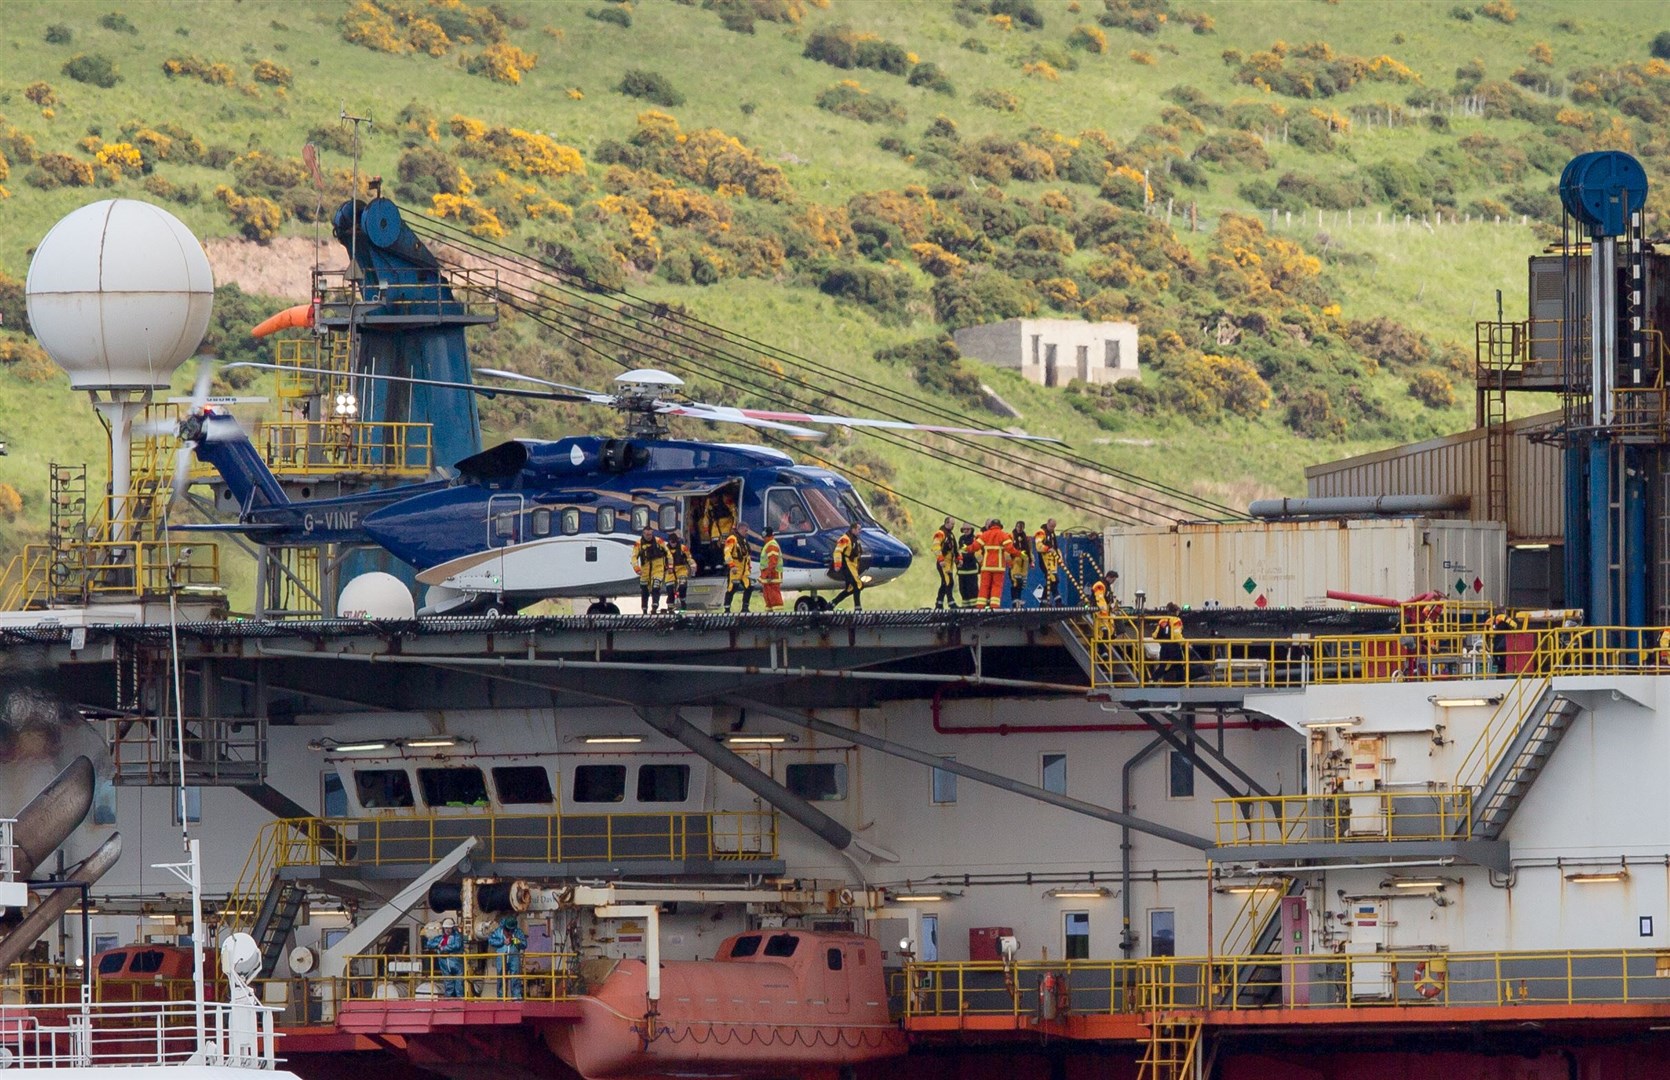 Helicopters have been deployed to remove activists from the rig in the Cromarty Firth but Greenpeace has said it won't give up. Picture: Greenpeace